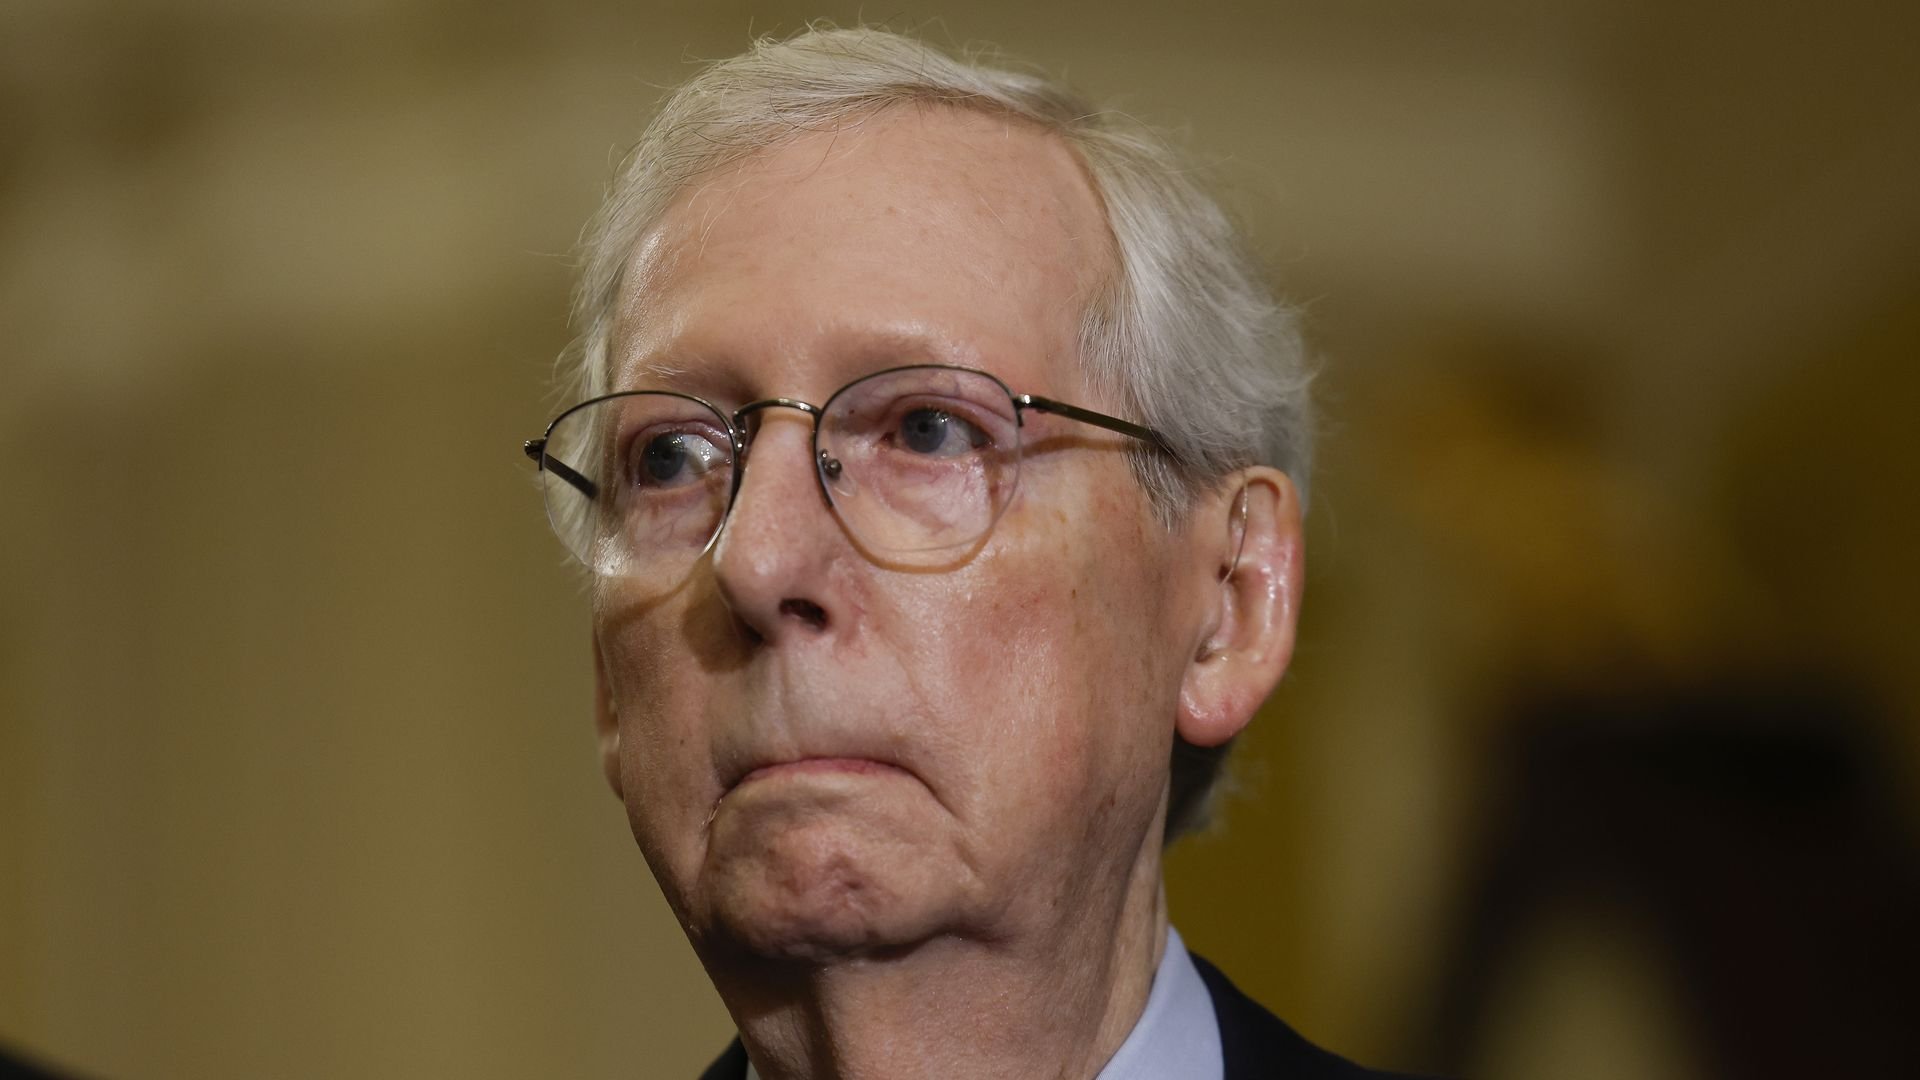 McConnell: Government shutdowns have "always been a loser for Republicans"